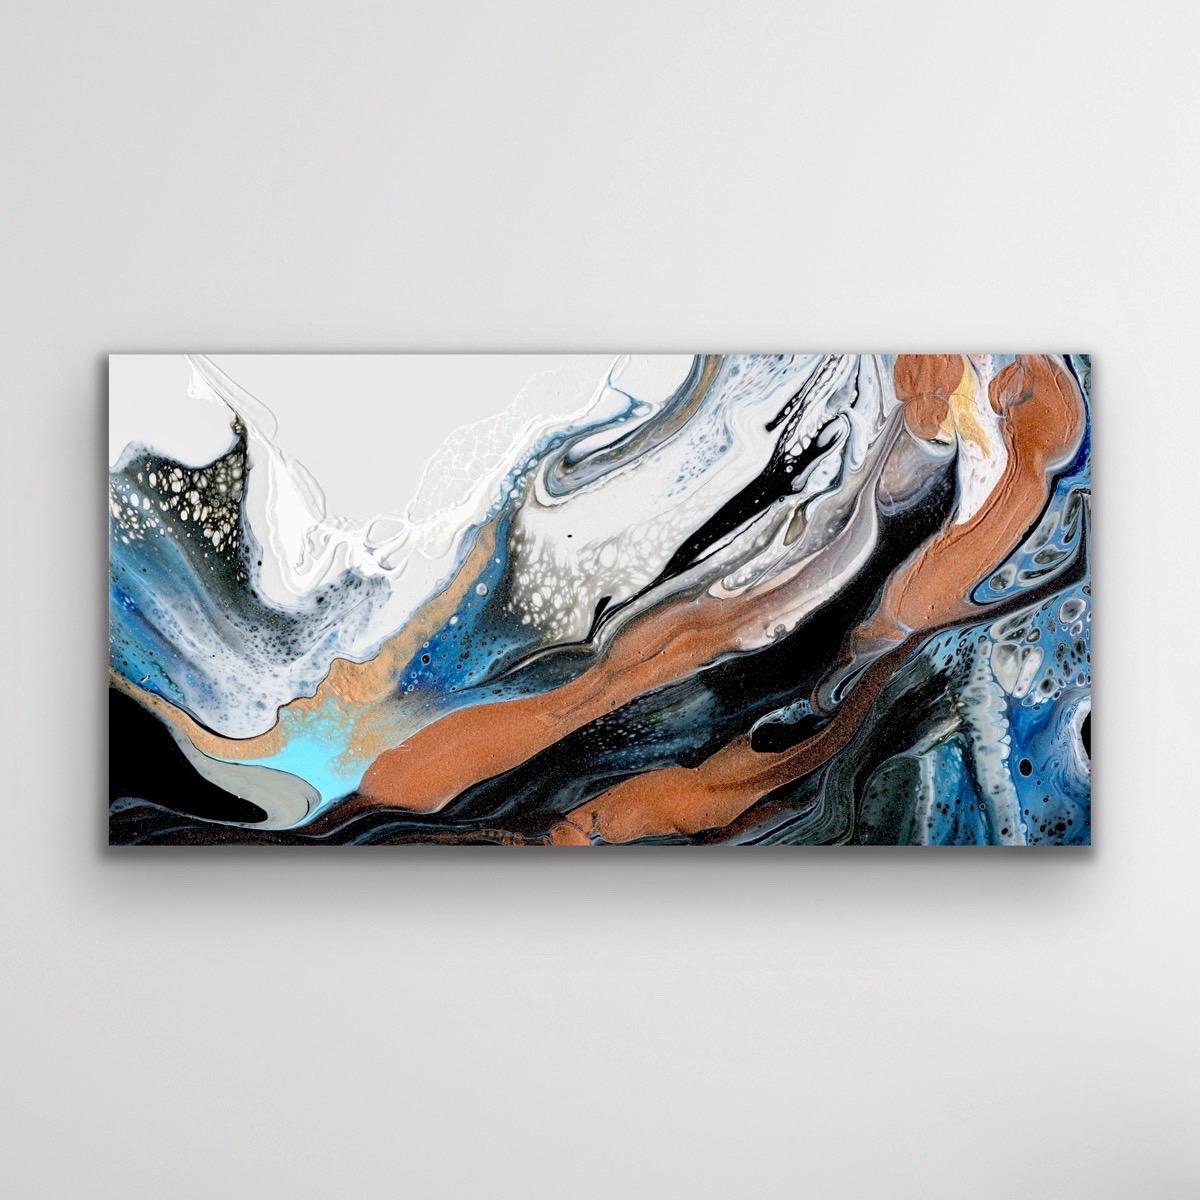 This modern abstract giclée is printed on a lightweight metal composite and is suitable for indoor or outdoor décor. This LIMITED EDITION PRINT of Celeste Reiter's original painting is signed by the artist. 

-Title: Tidal #2 of 50
-Artist: Celeste